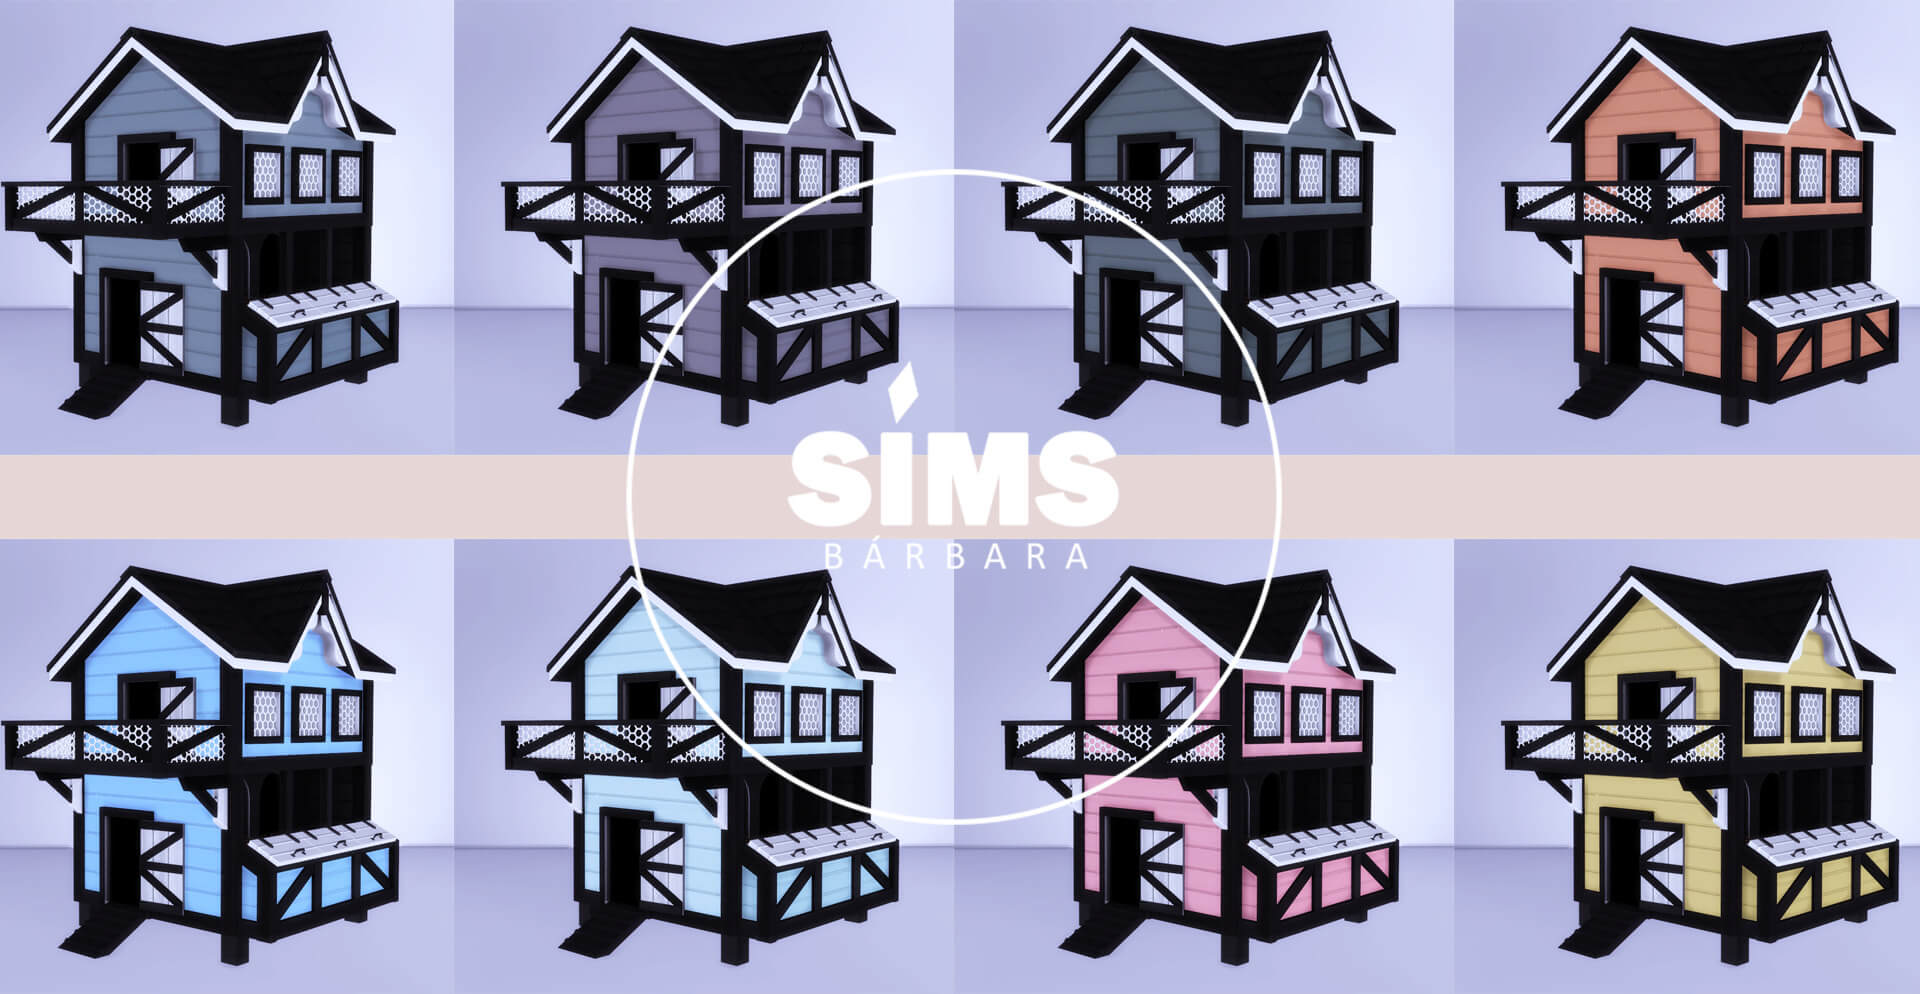 how to recolor sims 4